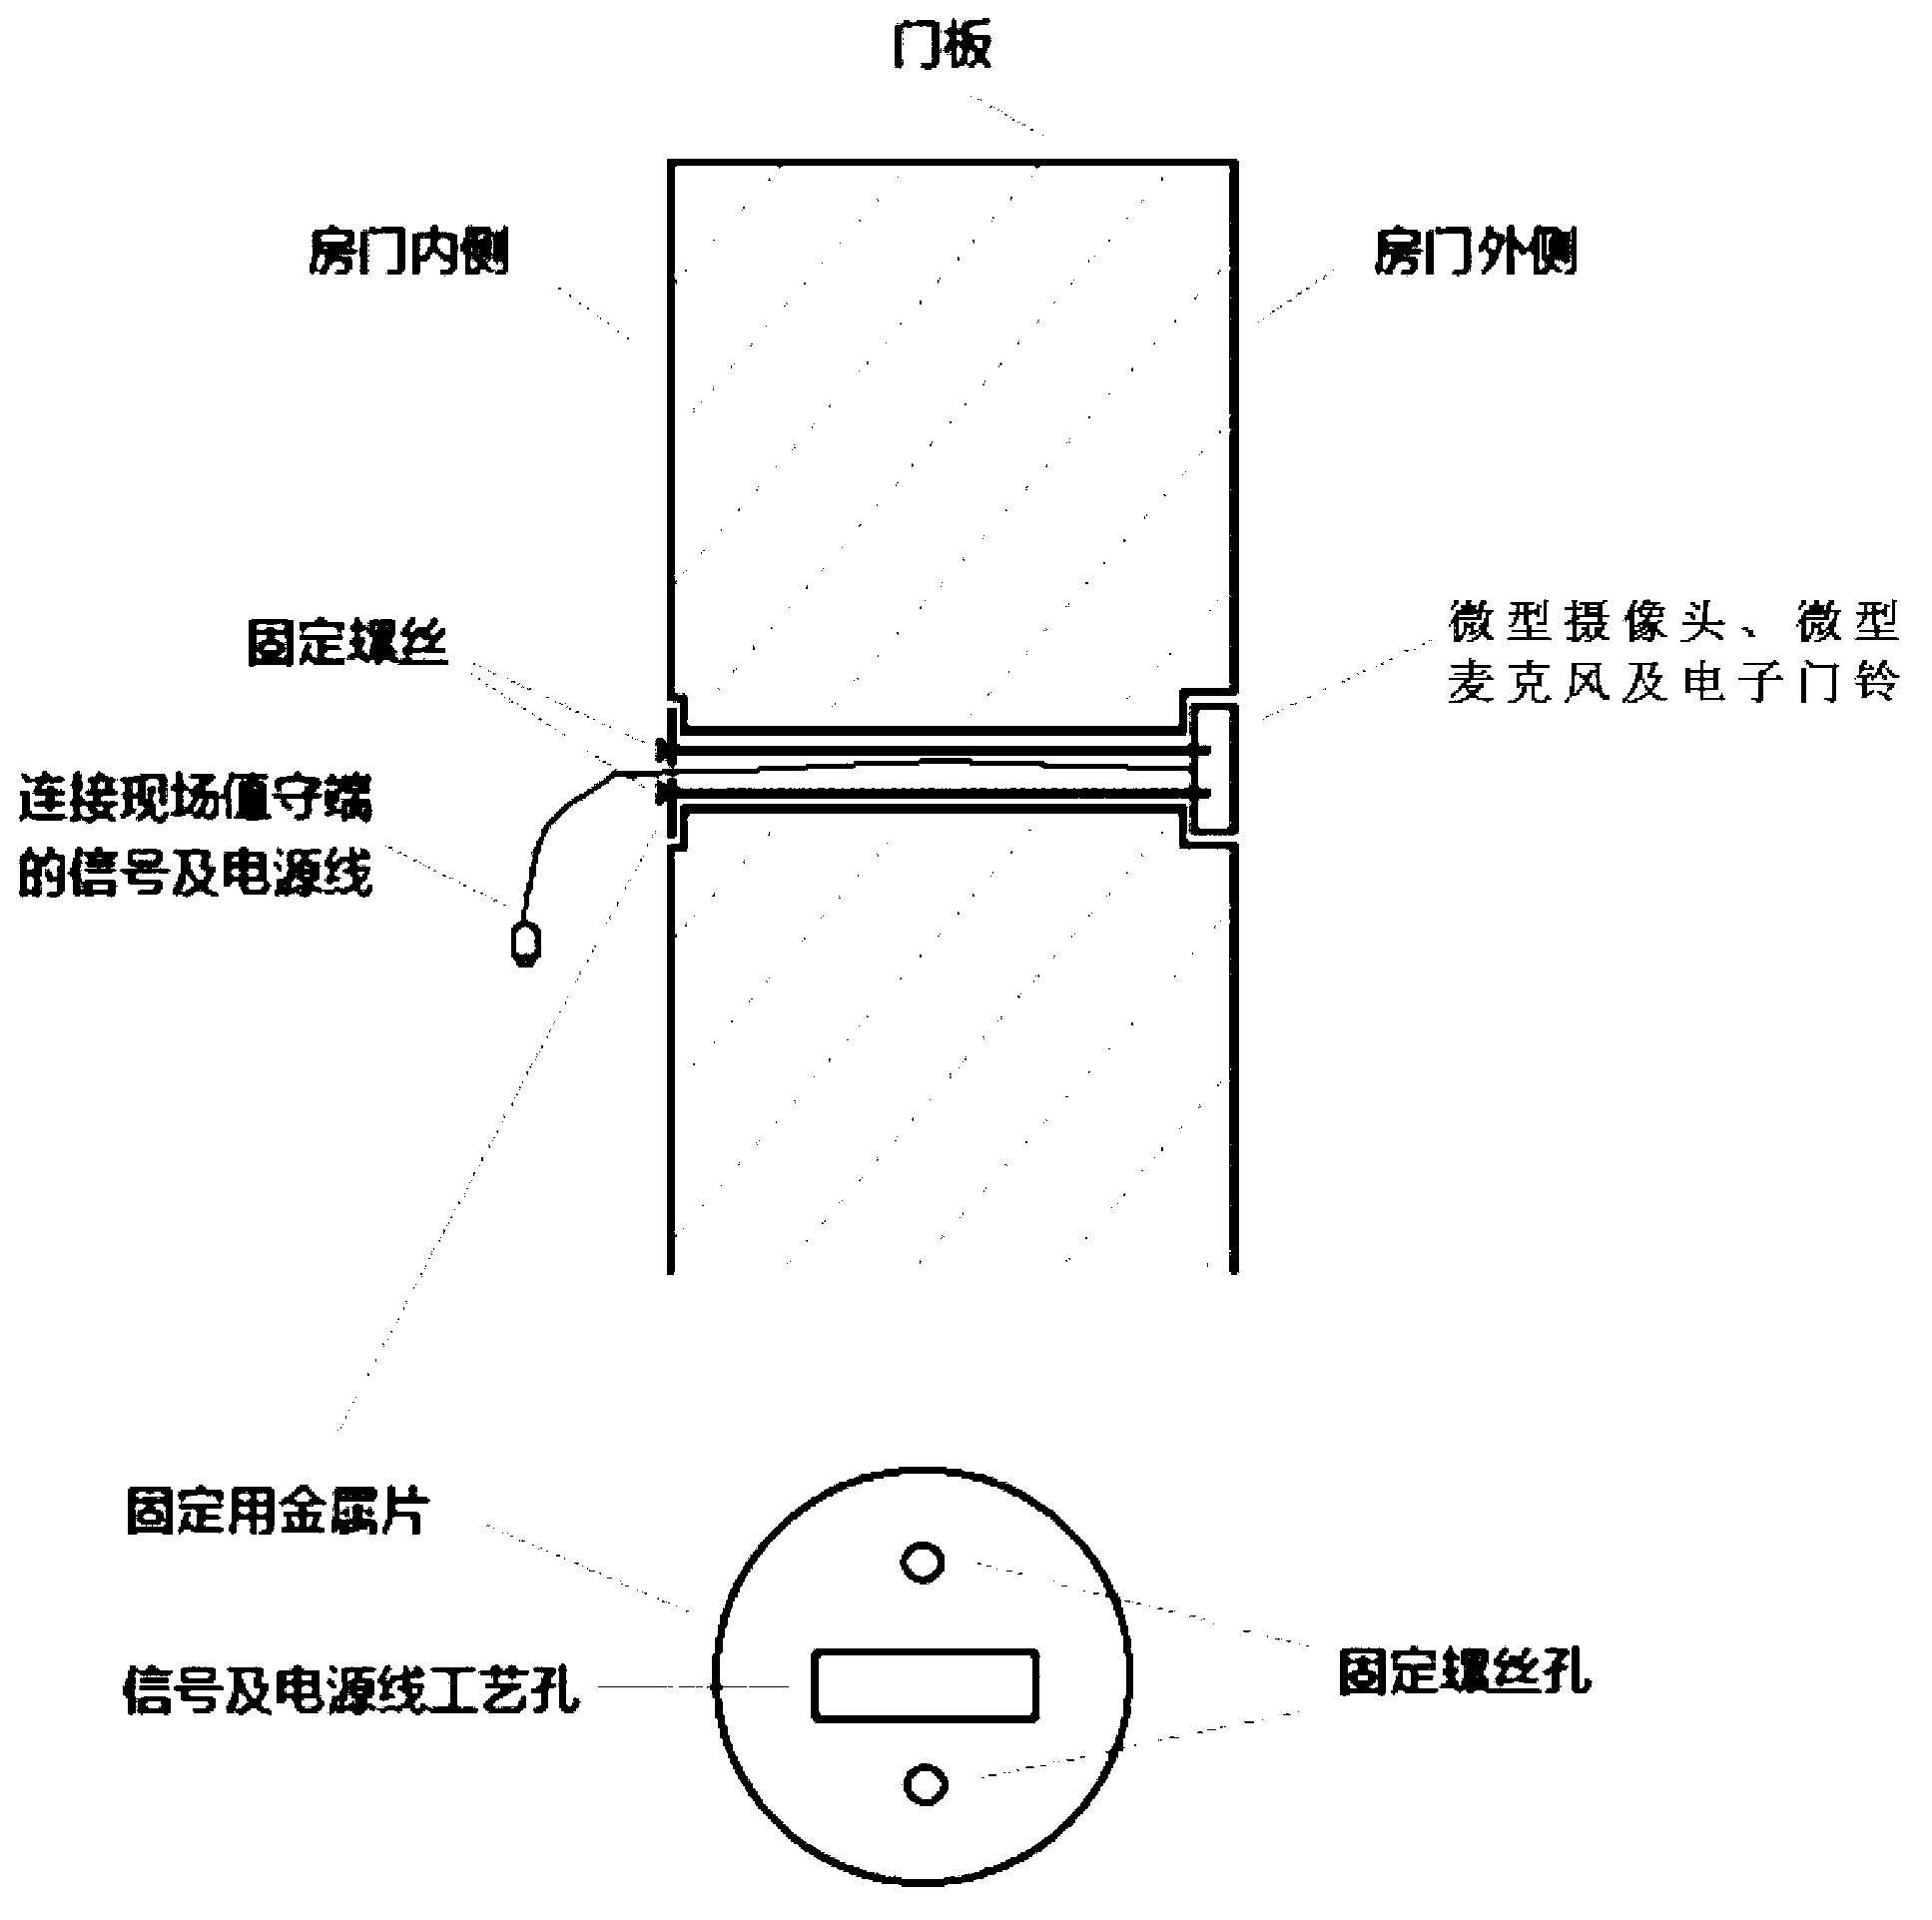 Remote monitoring system and remote monitoring method with door alarm and real-time voice response functions